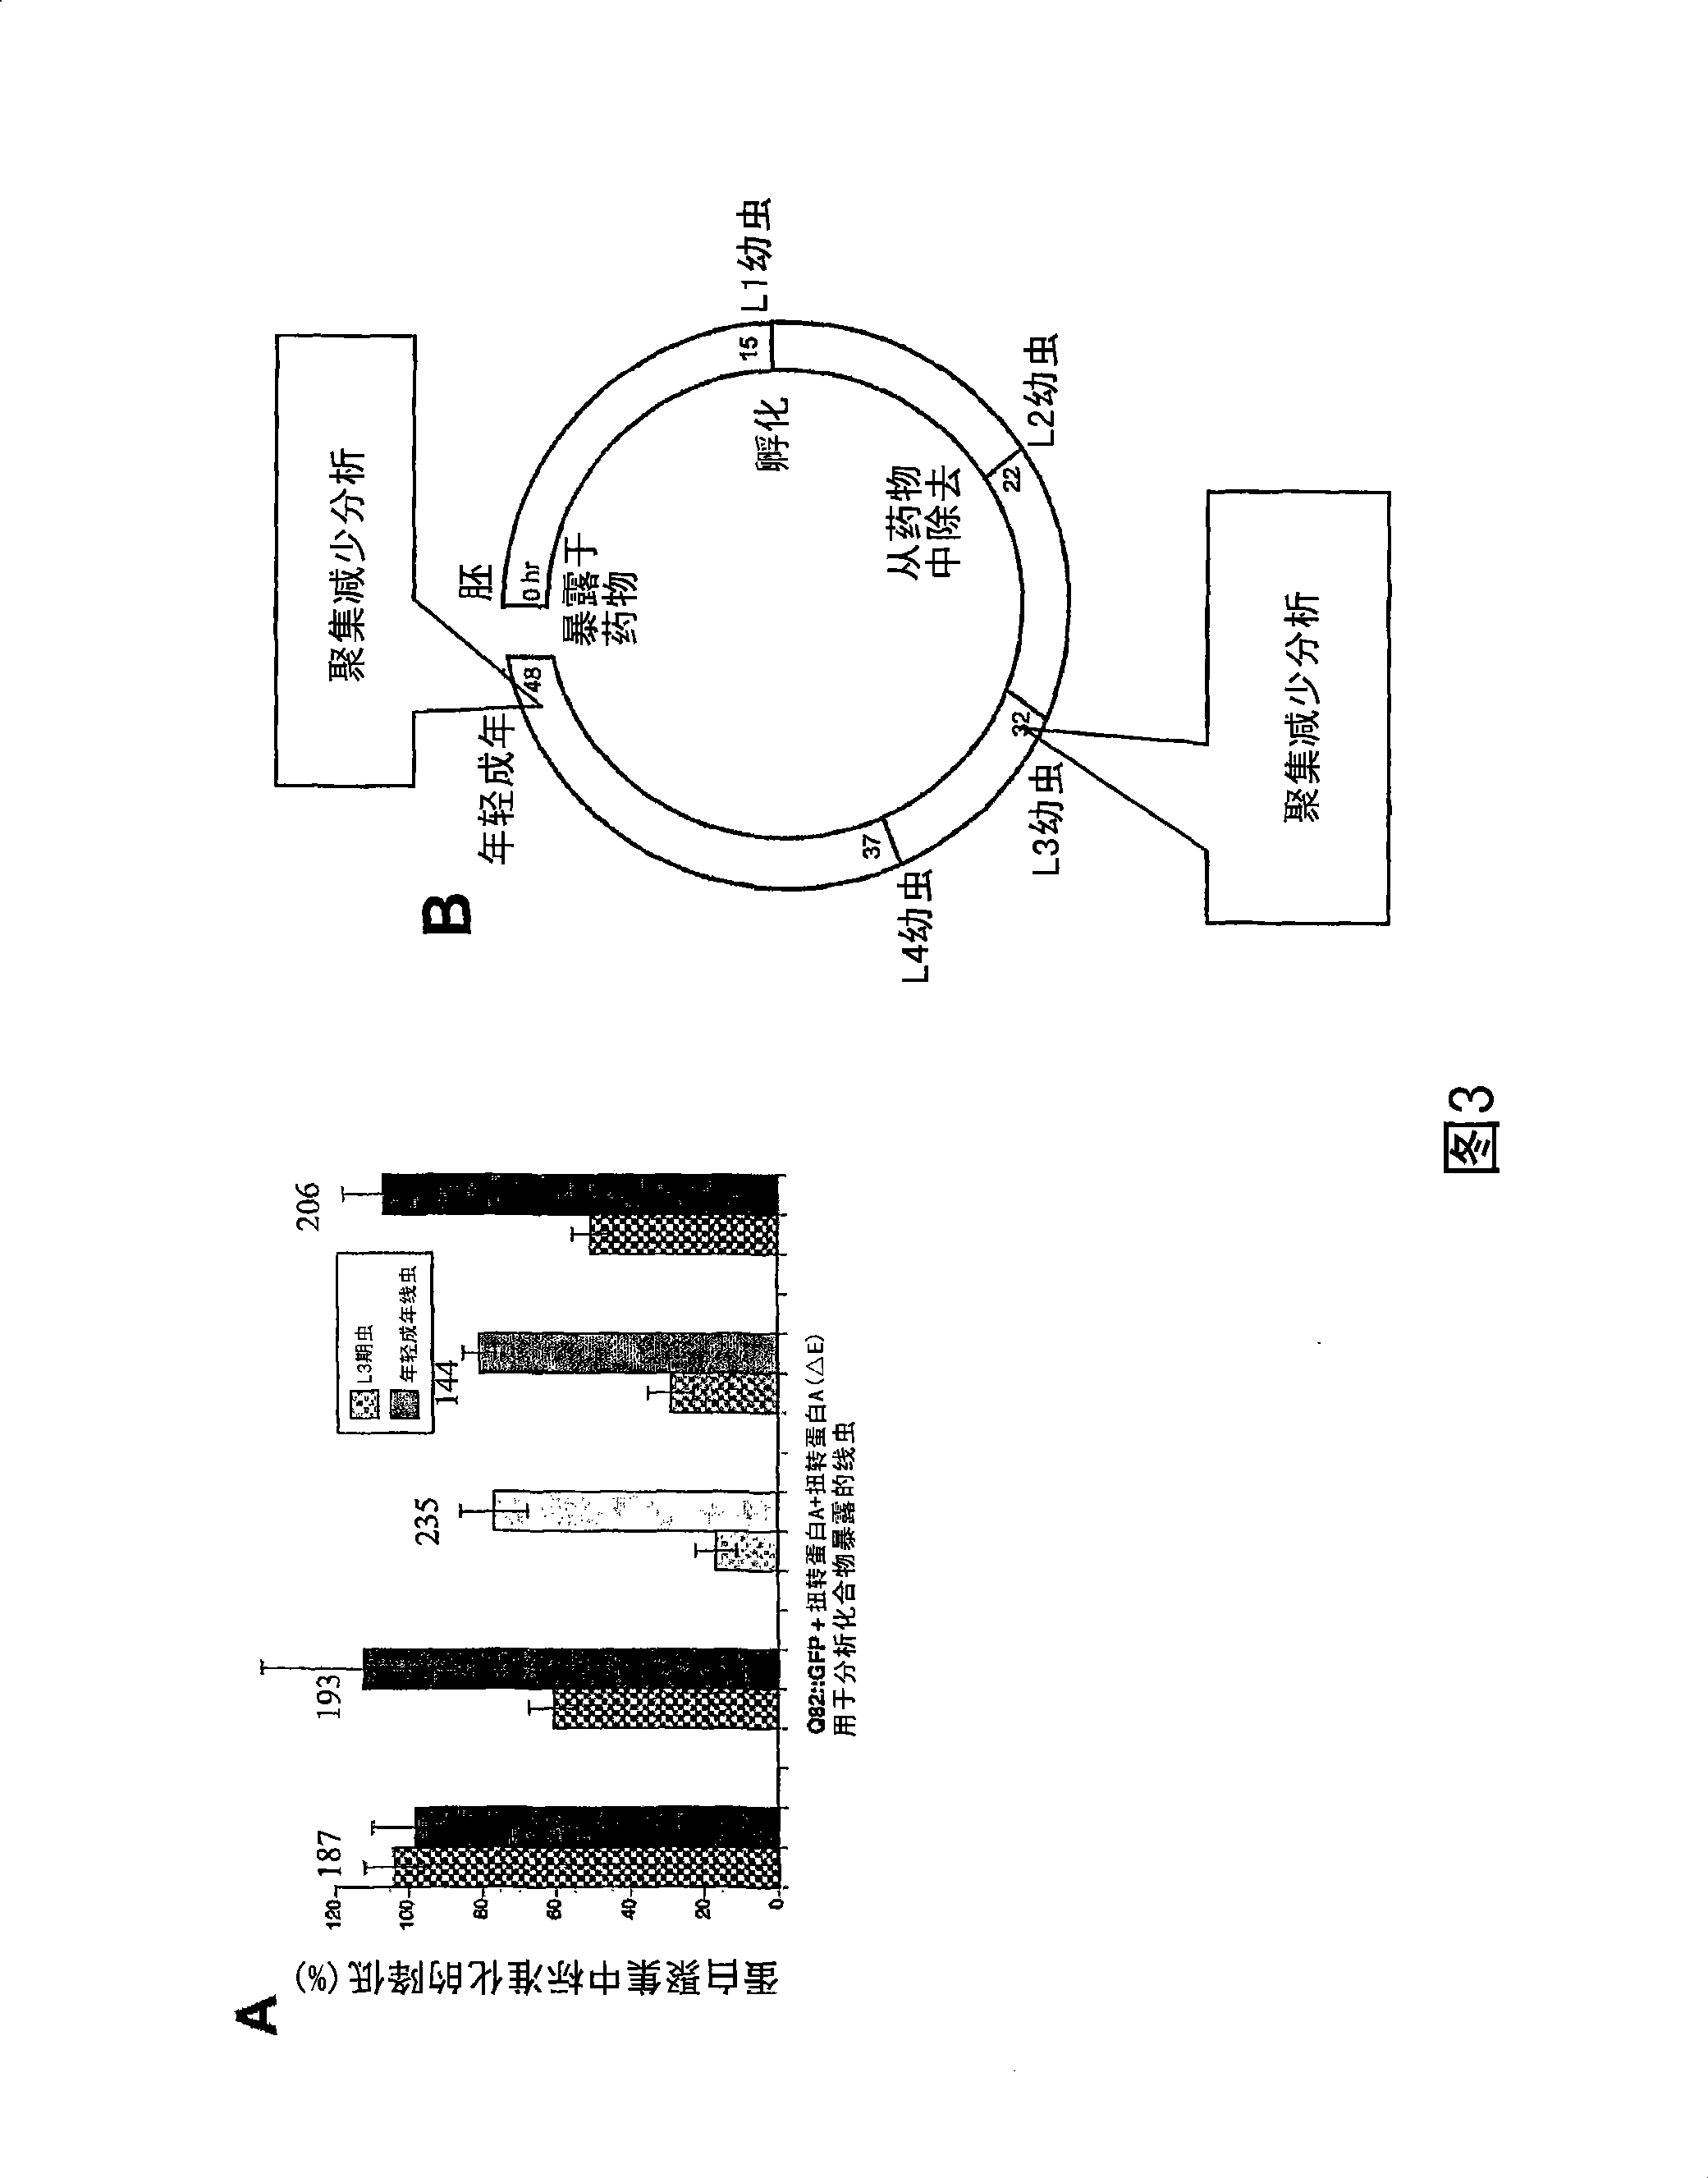 Methods of using small molecule compounds for neuroprotection